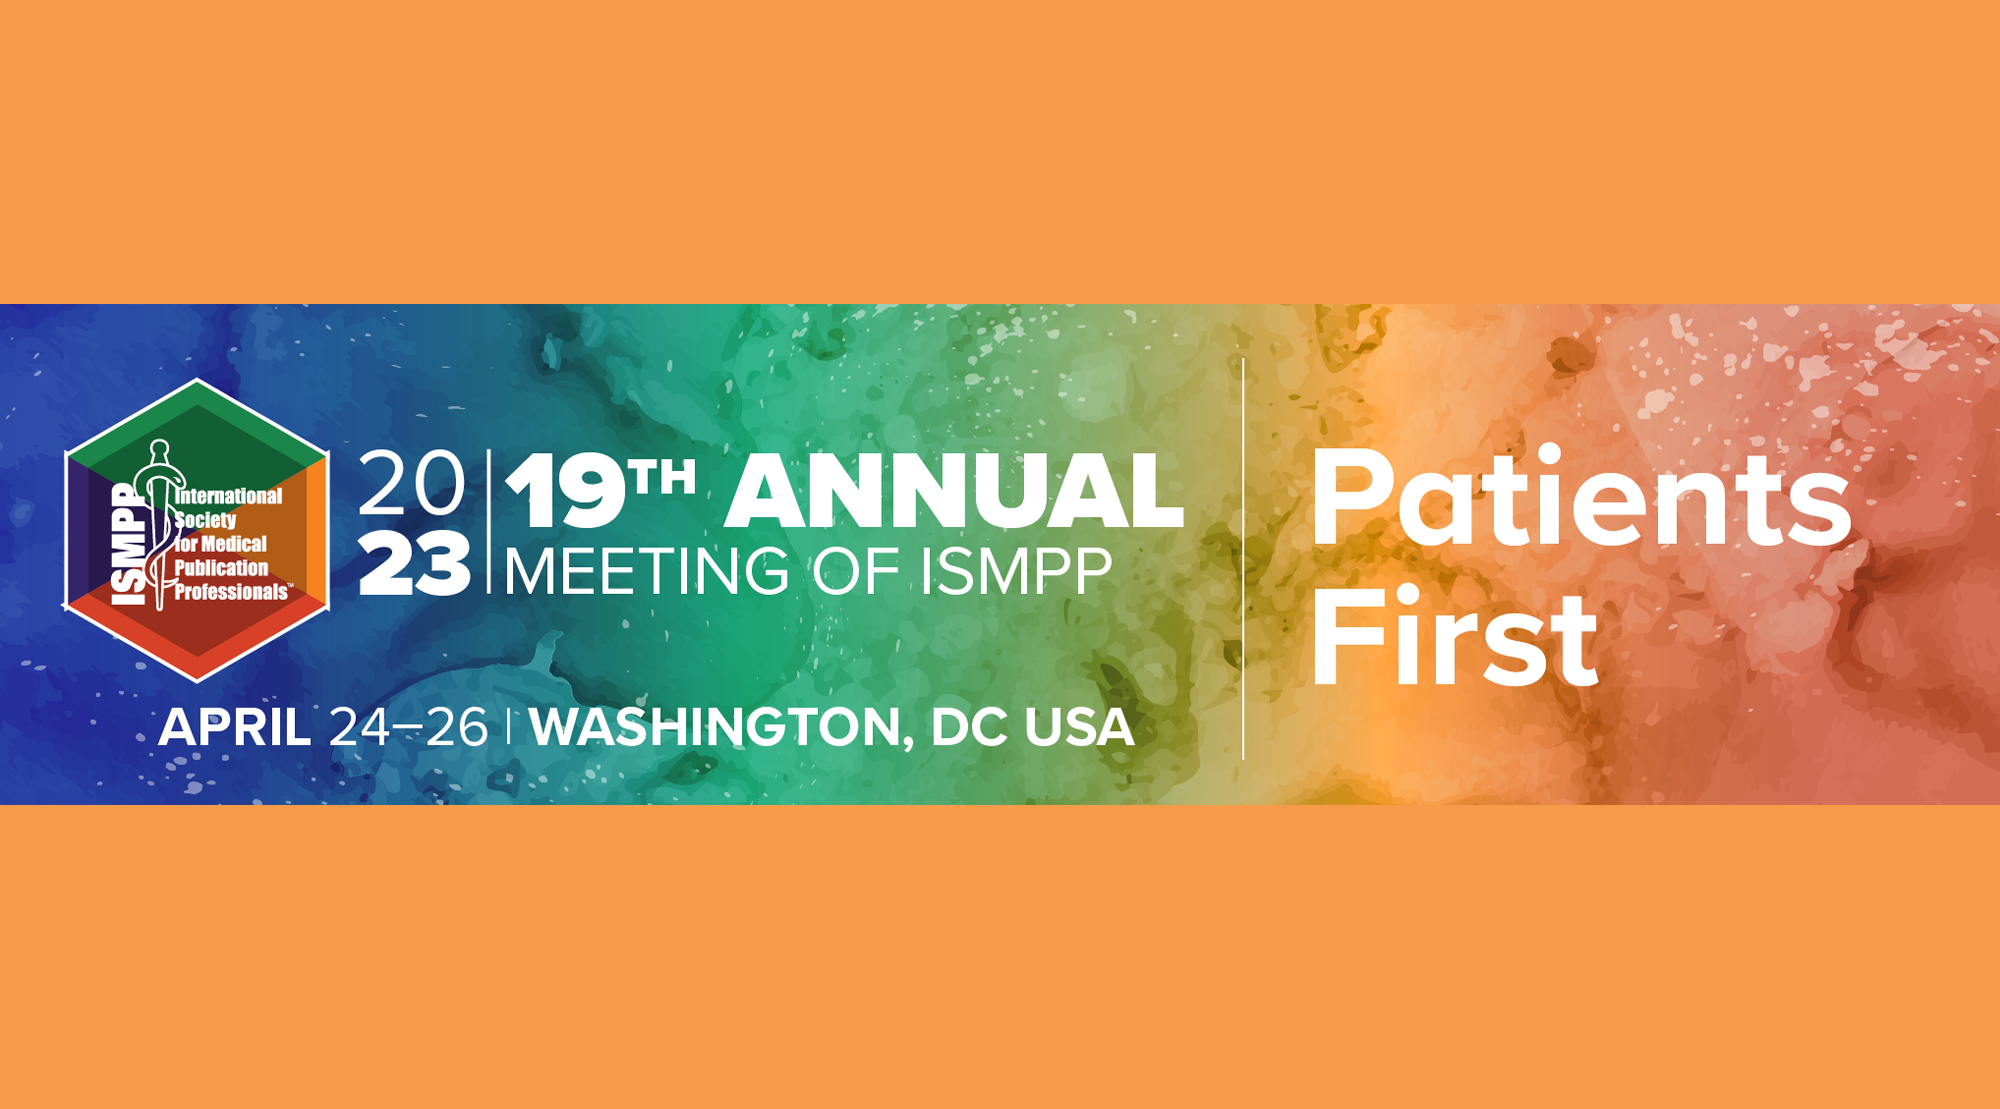 19th Annual Meeting of ISMPP